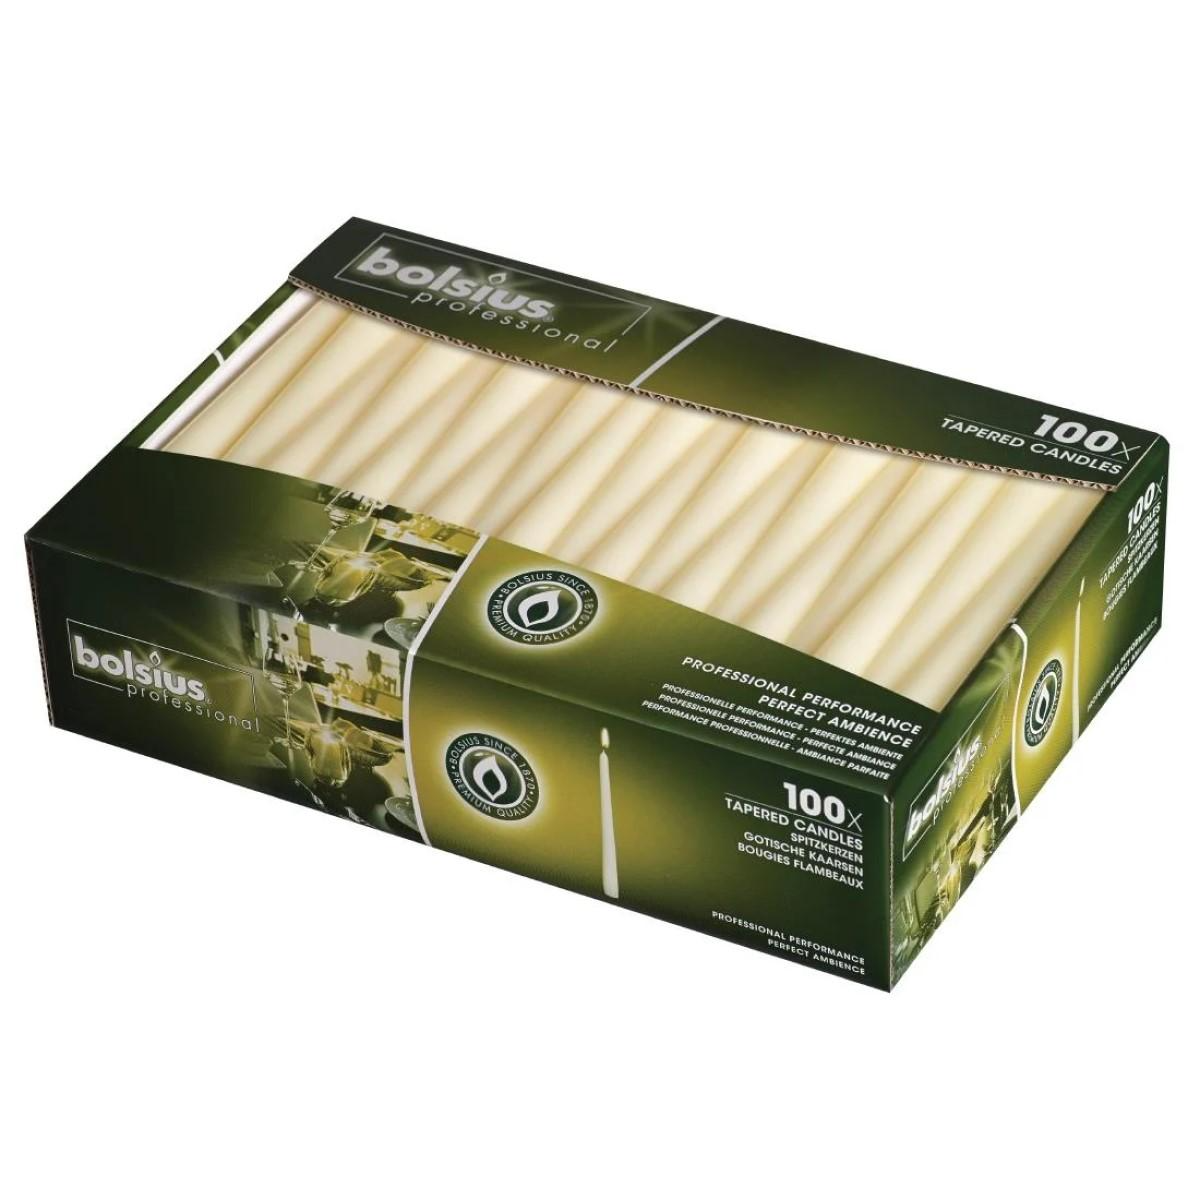 Tapered Ivory Candles, Pack of 100